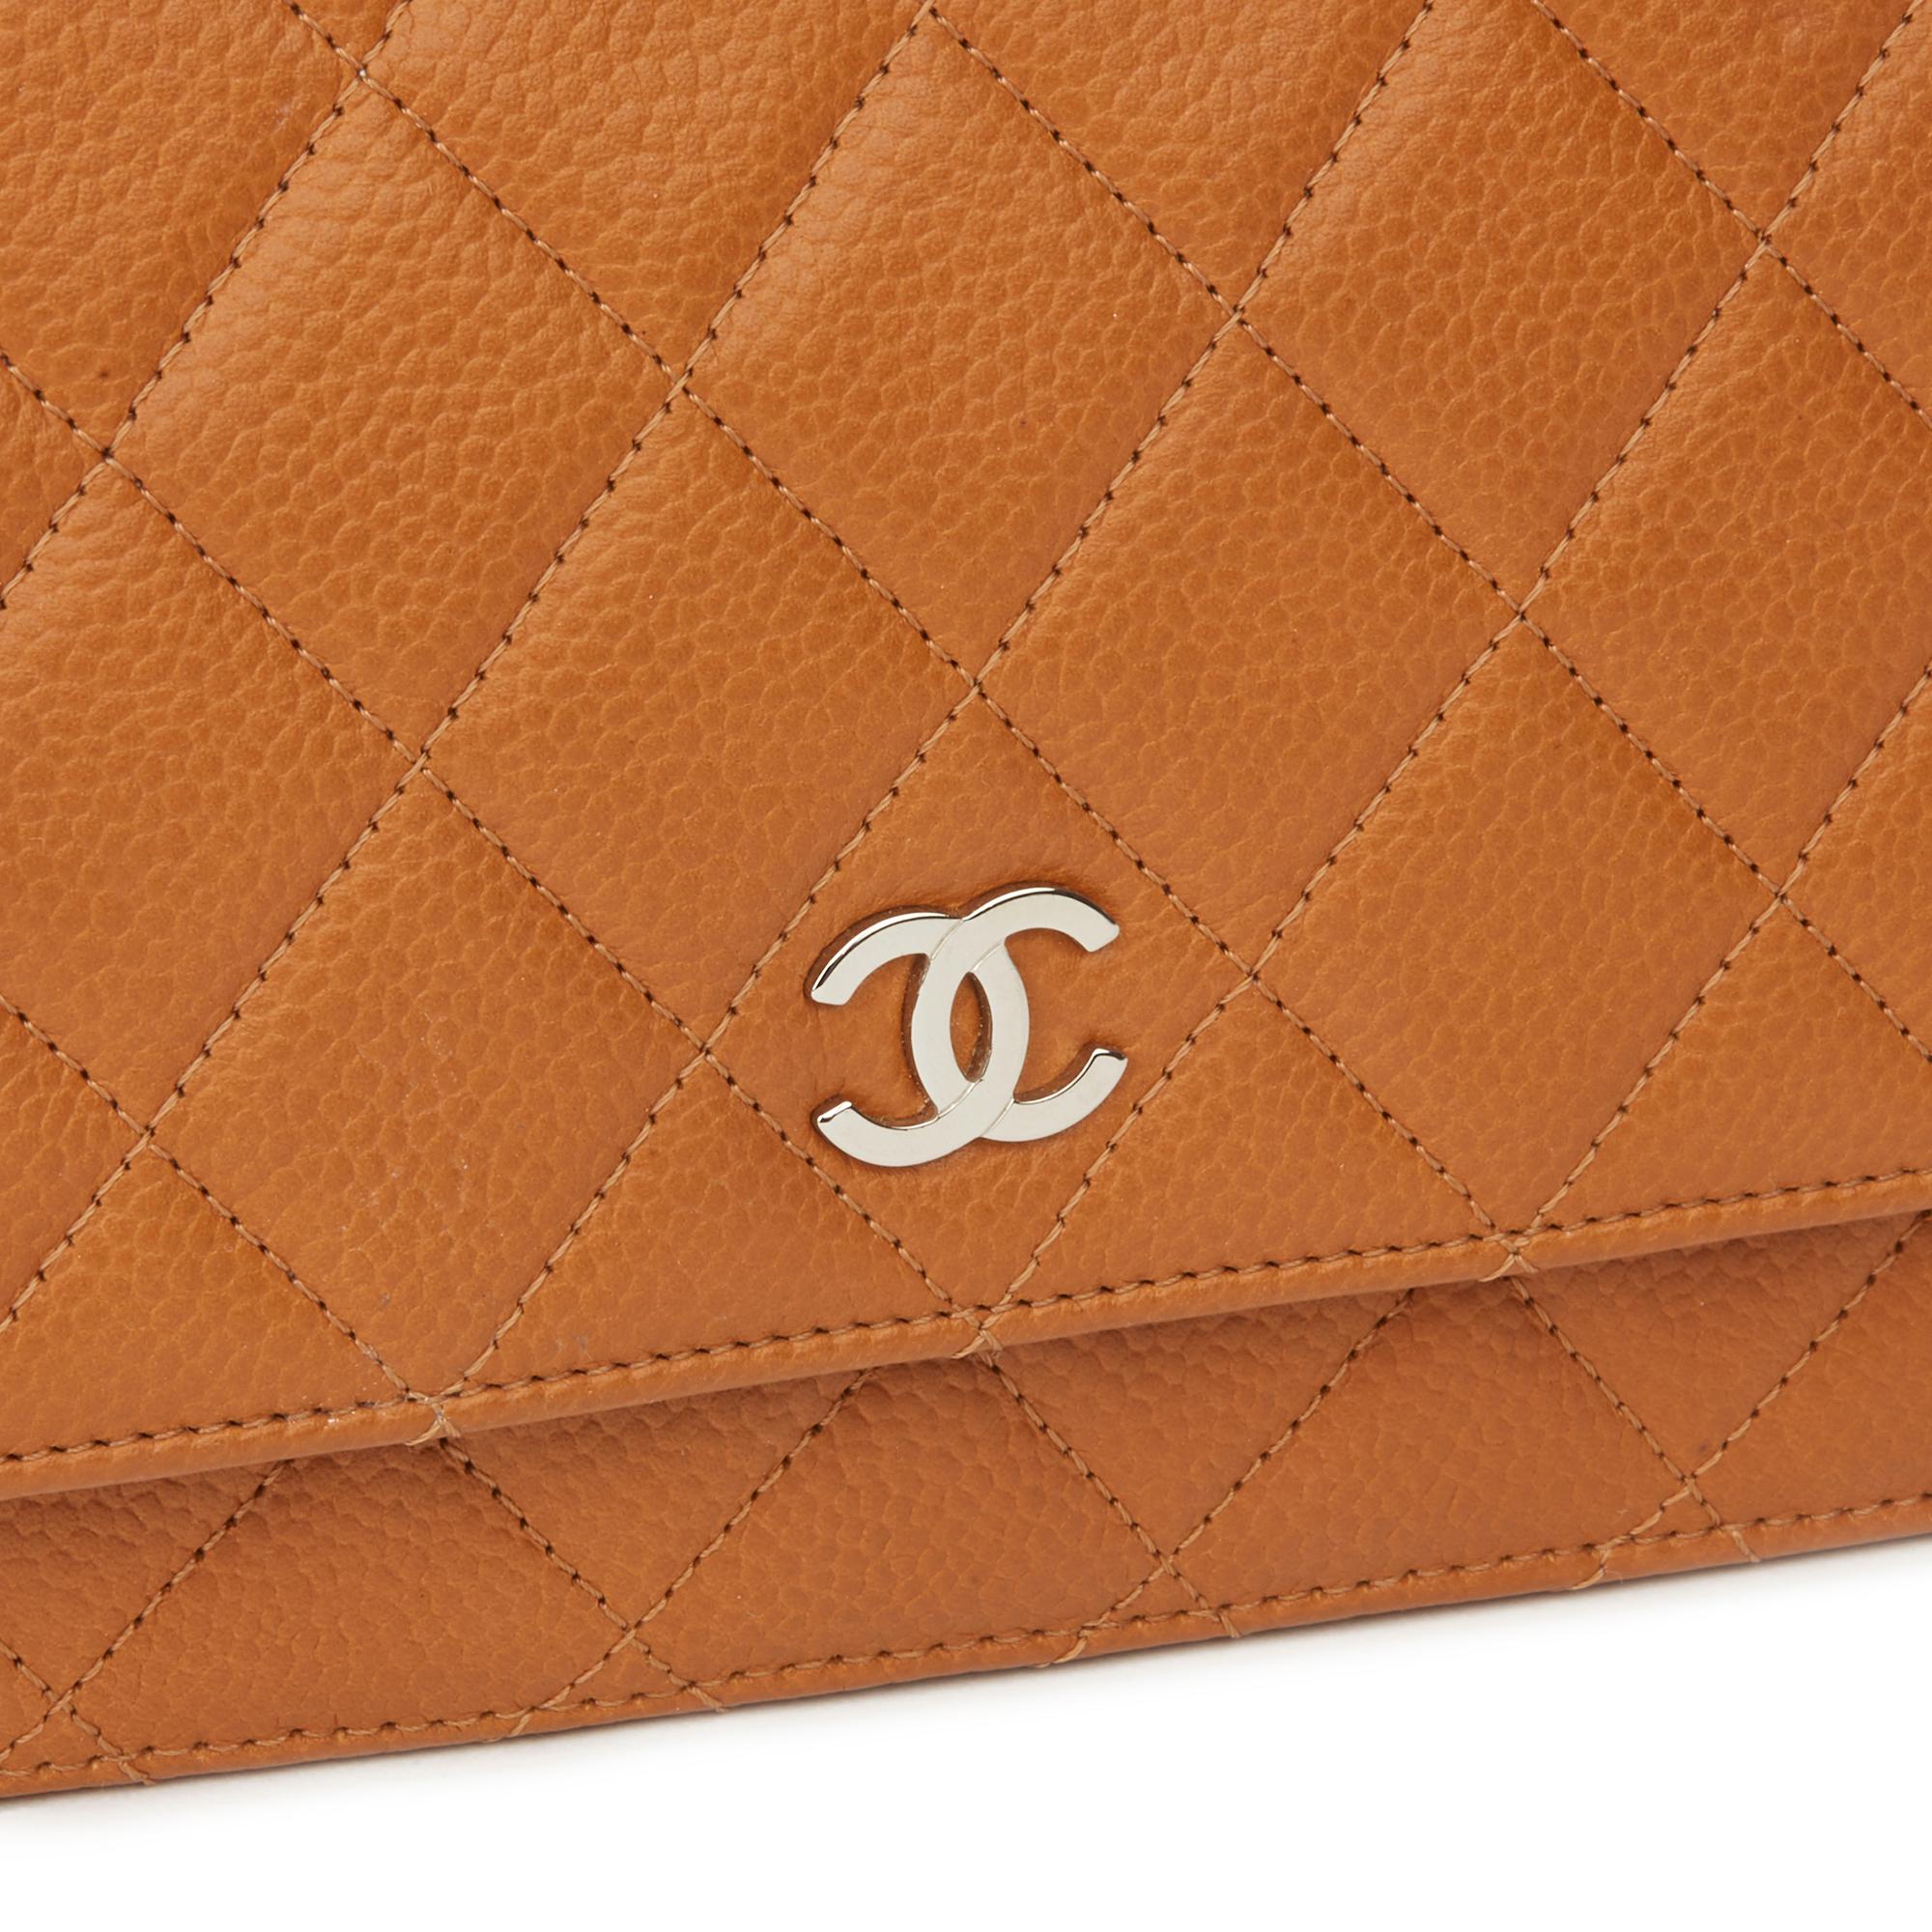 Women's 2011 Chanel Honey Beige Quilted Caviar Leather Wallet-on-Chain WOC